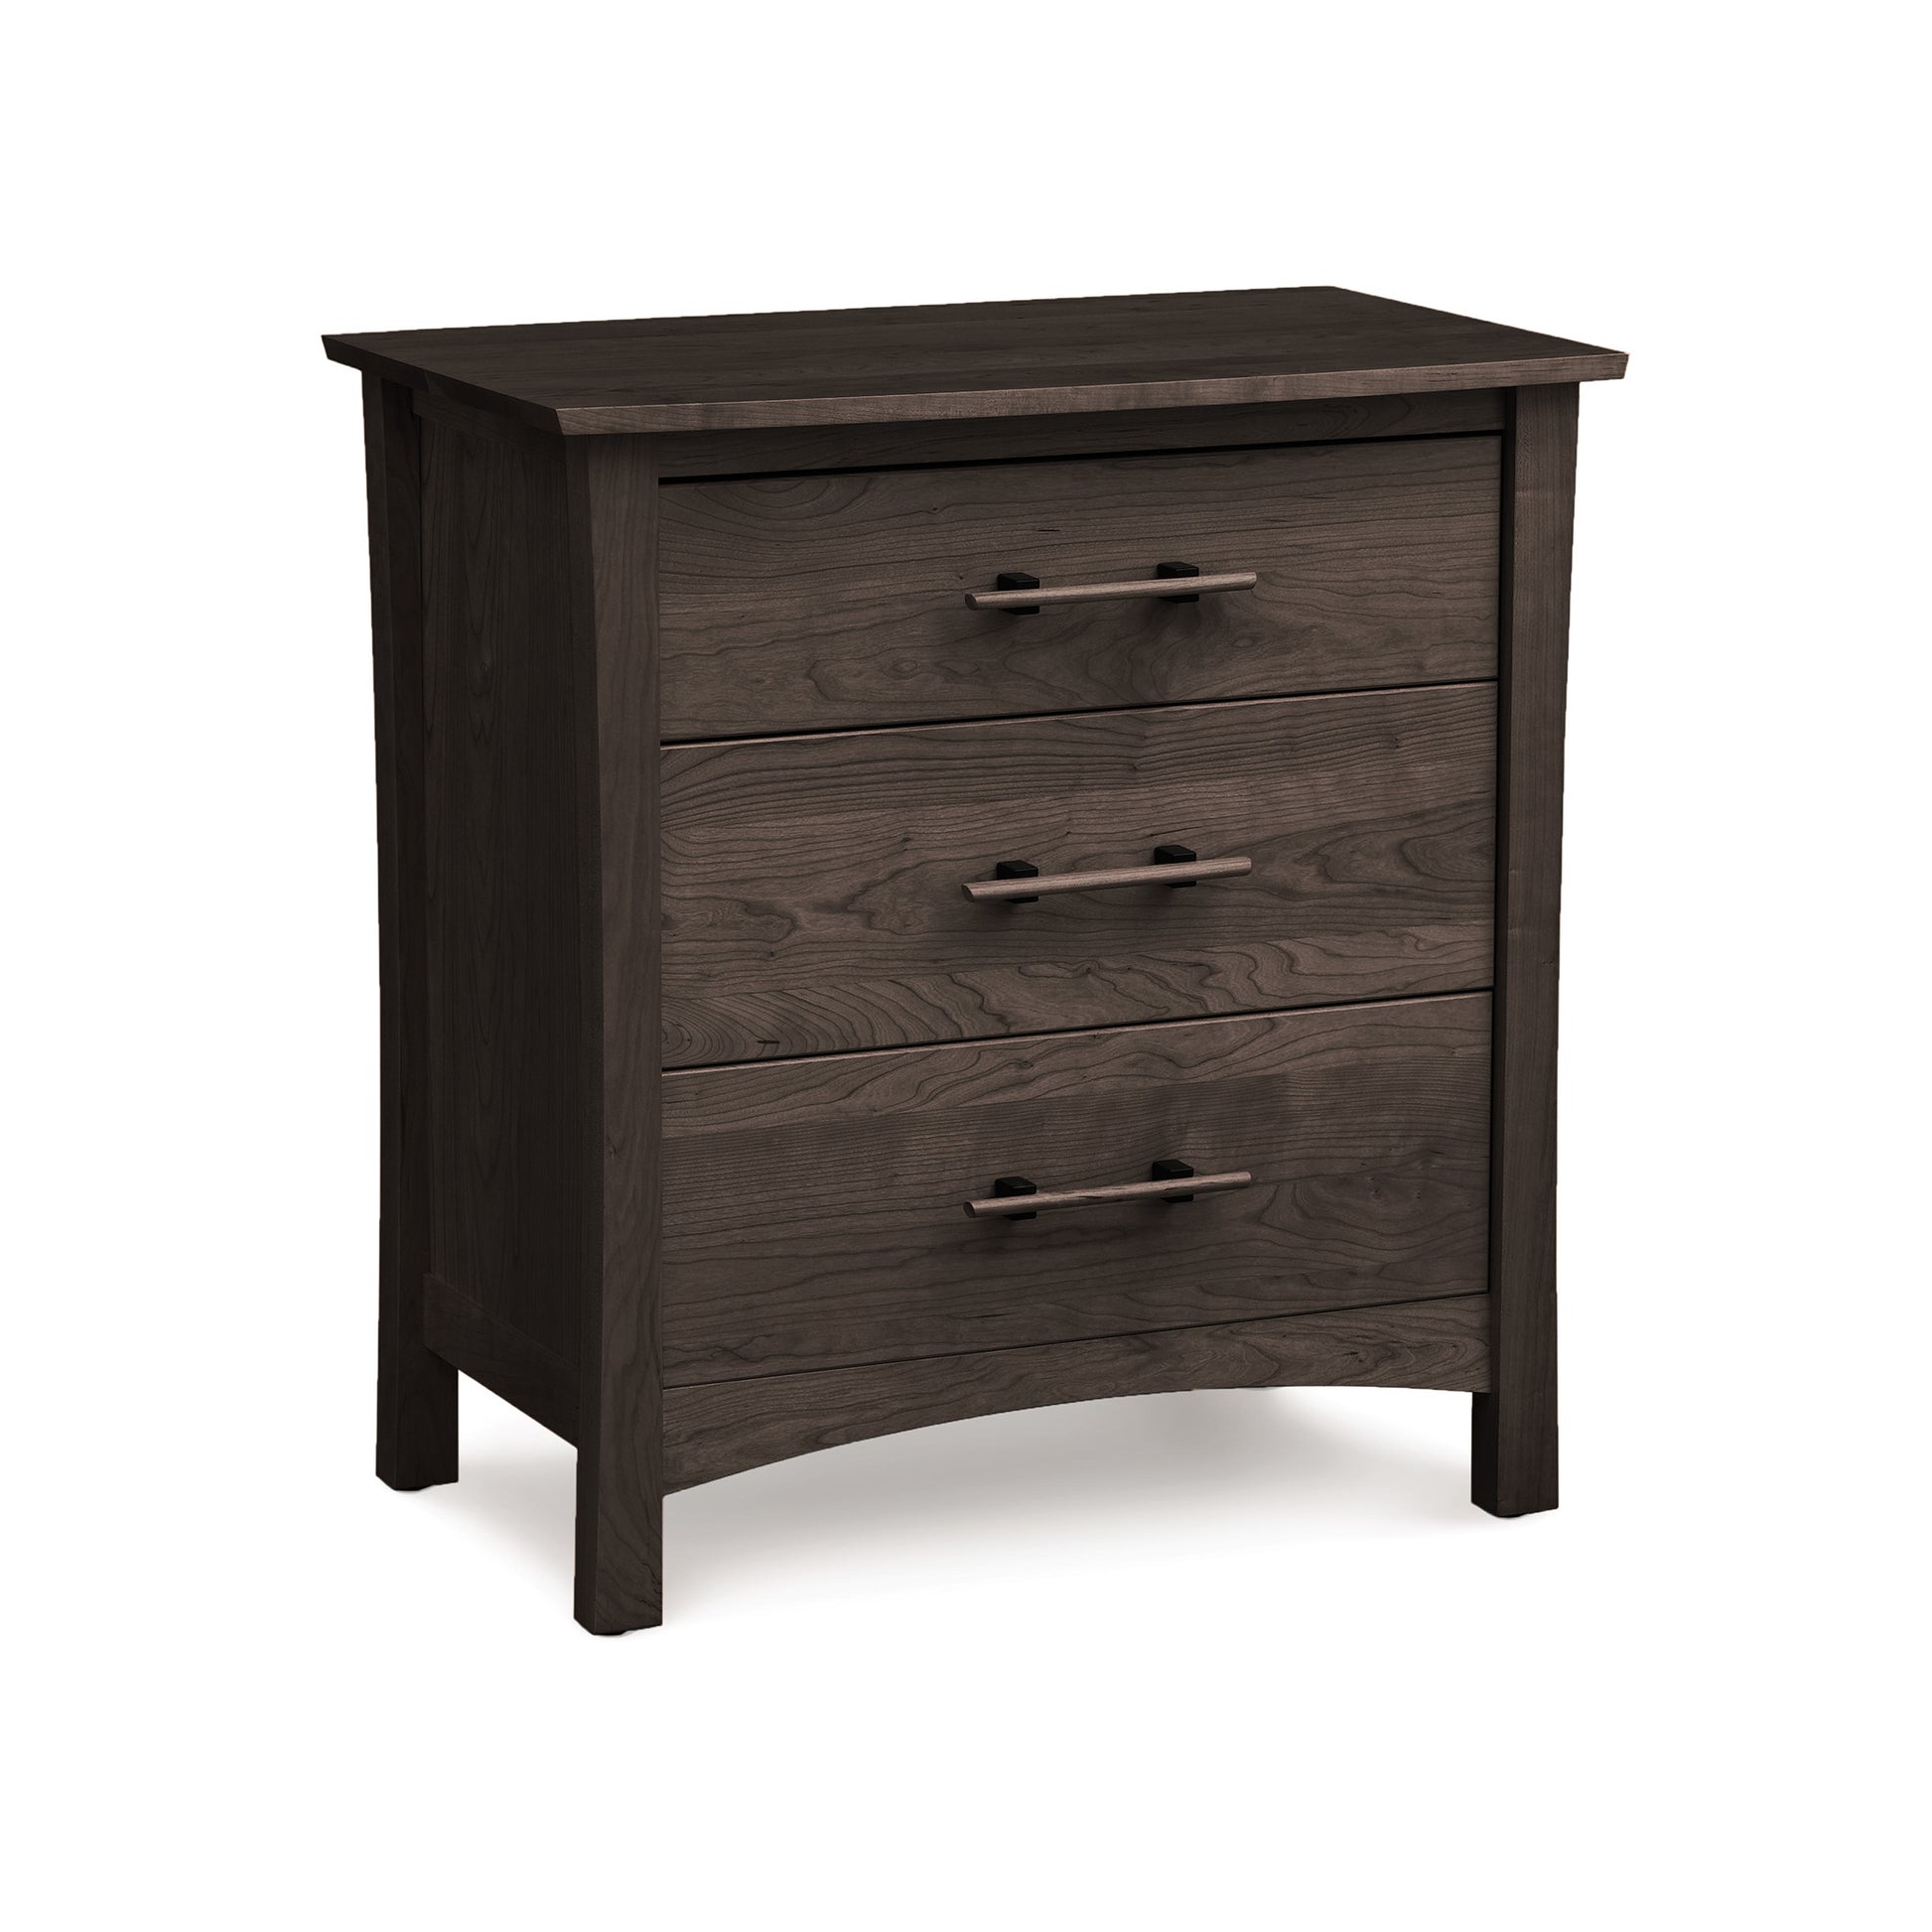 A luxury Copeland Furniture Monterey 3-Drawer Chest made of cherry wood, featuring three drawers on a white background.